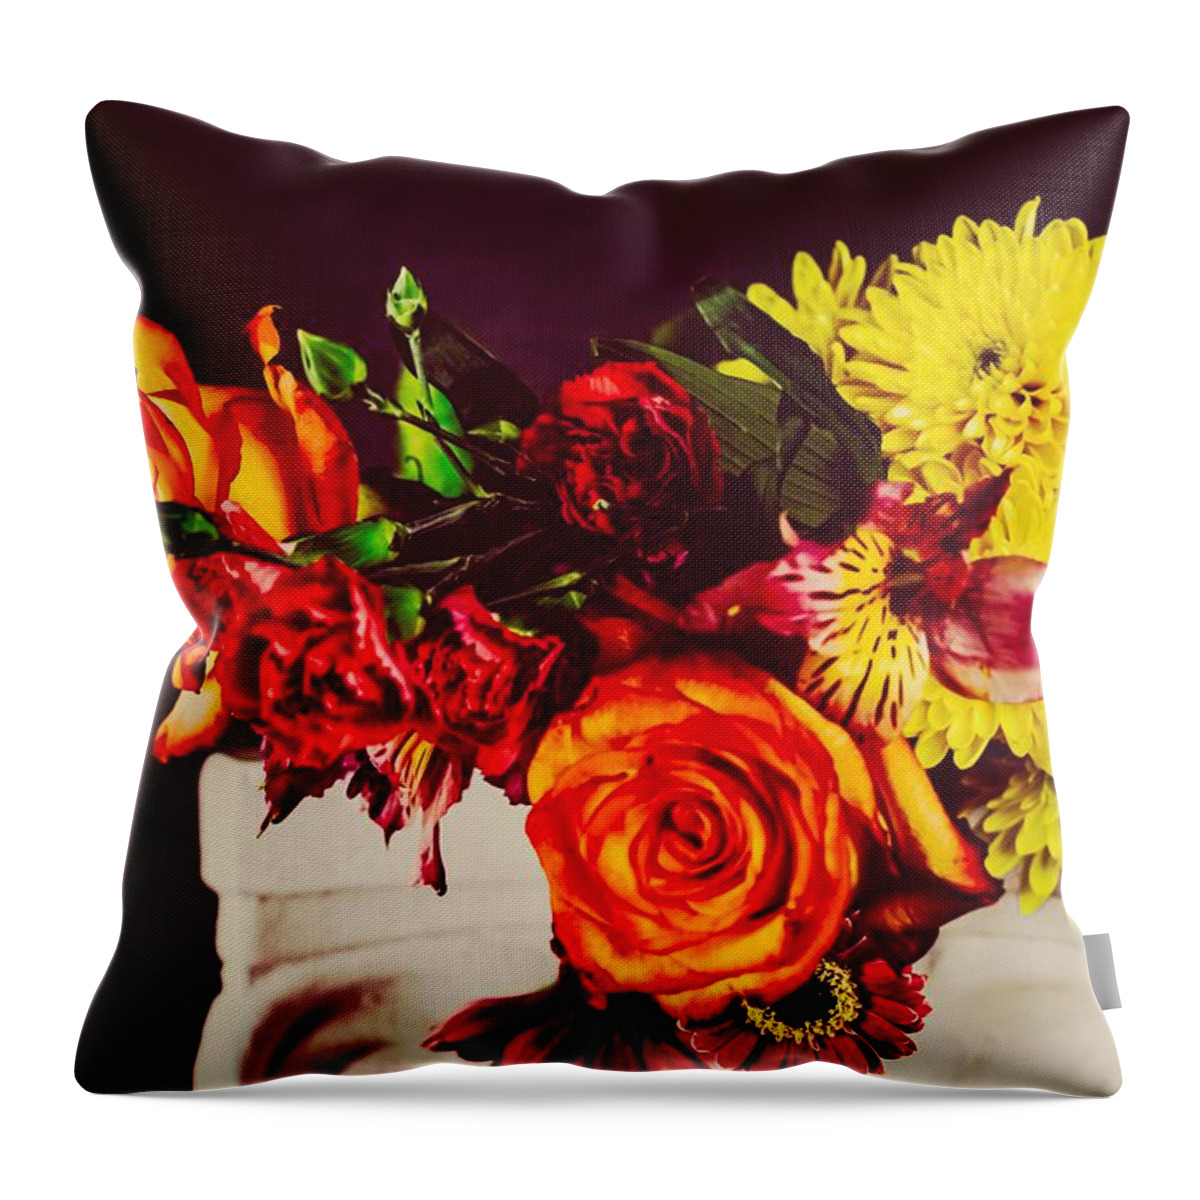 Flowers Us Usa Chicago New York Jersey Can California Rome U.k. England Oakland Las Vegas Hollywood Beverly Hills France Germany Rome Kansas Walton’s Mountain Virginia Milwaukee Door County County Cincinnati Throw Pillow featuring the photograph Flowers #2 by Windshield Photography